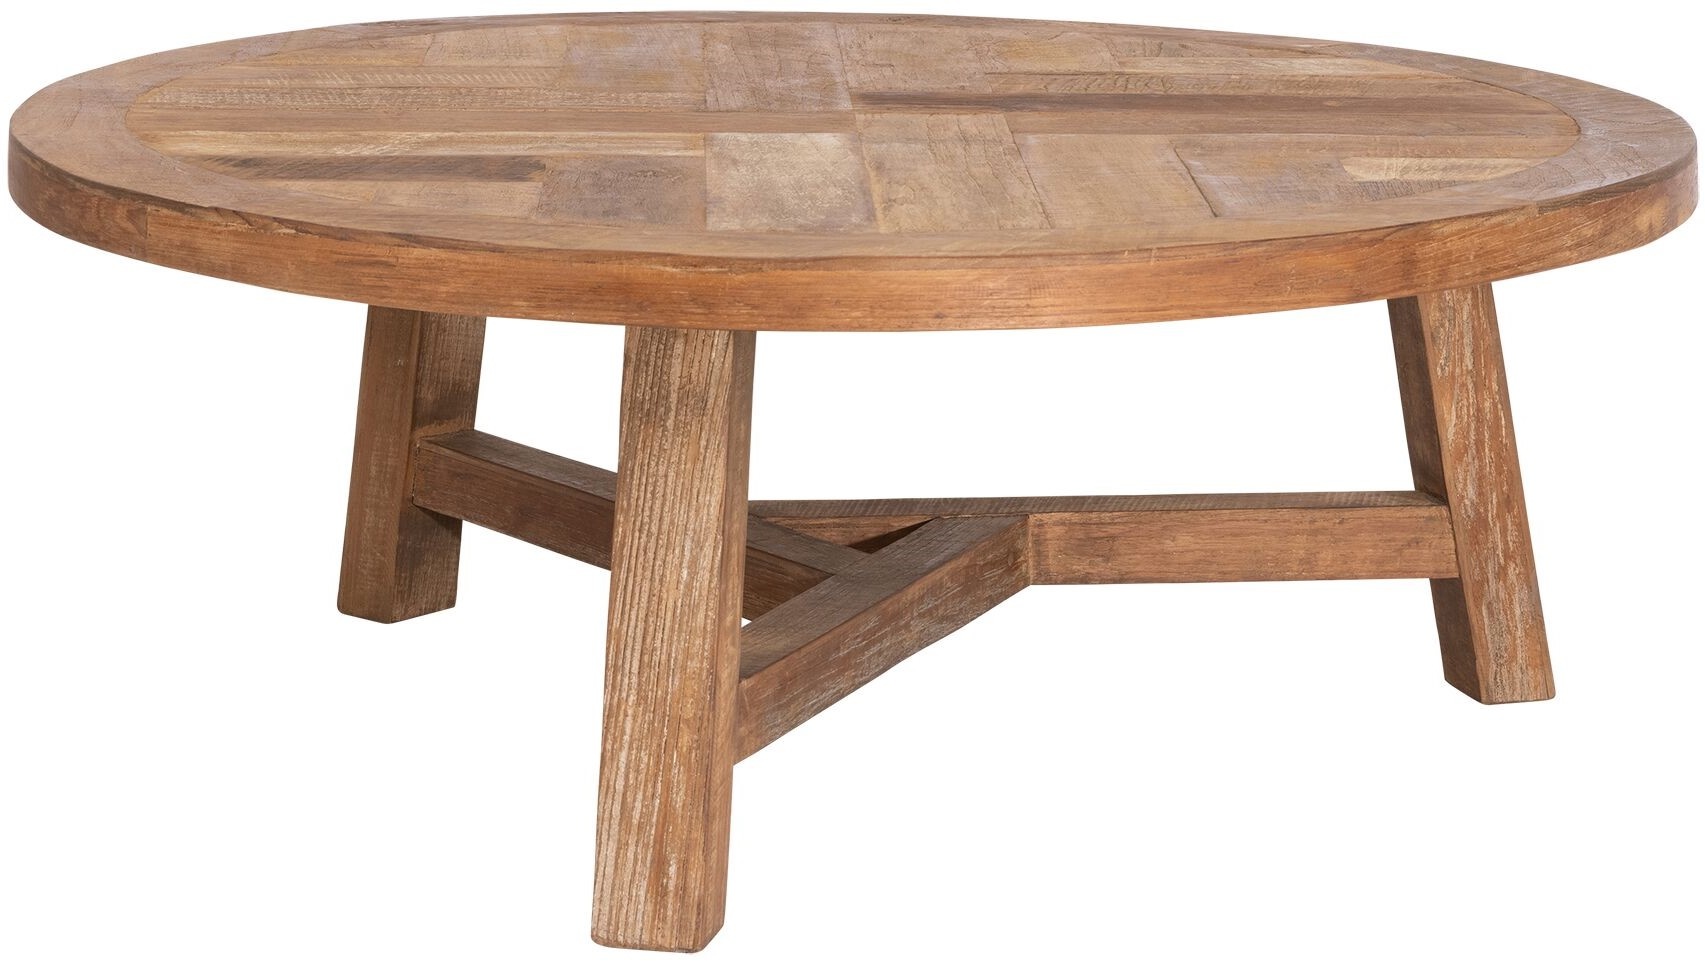 Troosteloos consensus Experiment DTP-Home Classic salontafel MONASTERY rond van gerecycled teakhout -  Homecompanyshop.nl